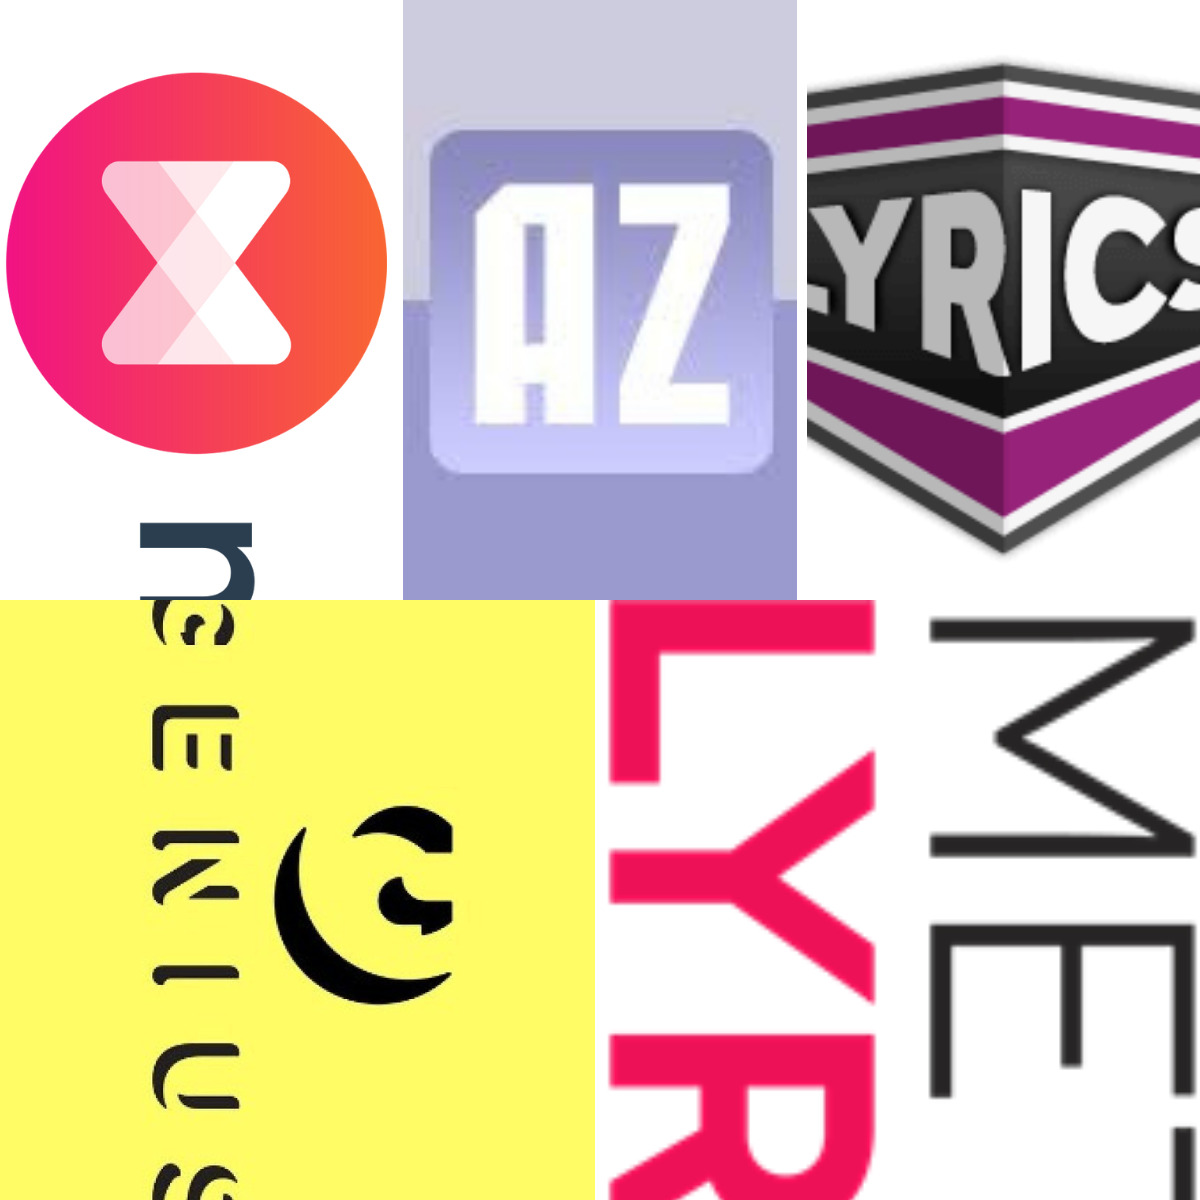 Music Lyrics: Top 5 Websites To Find Lyrics To Your Favorite Songs, Yours Truly, Articles, February 7, 2023